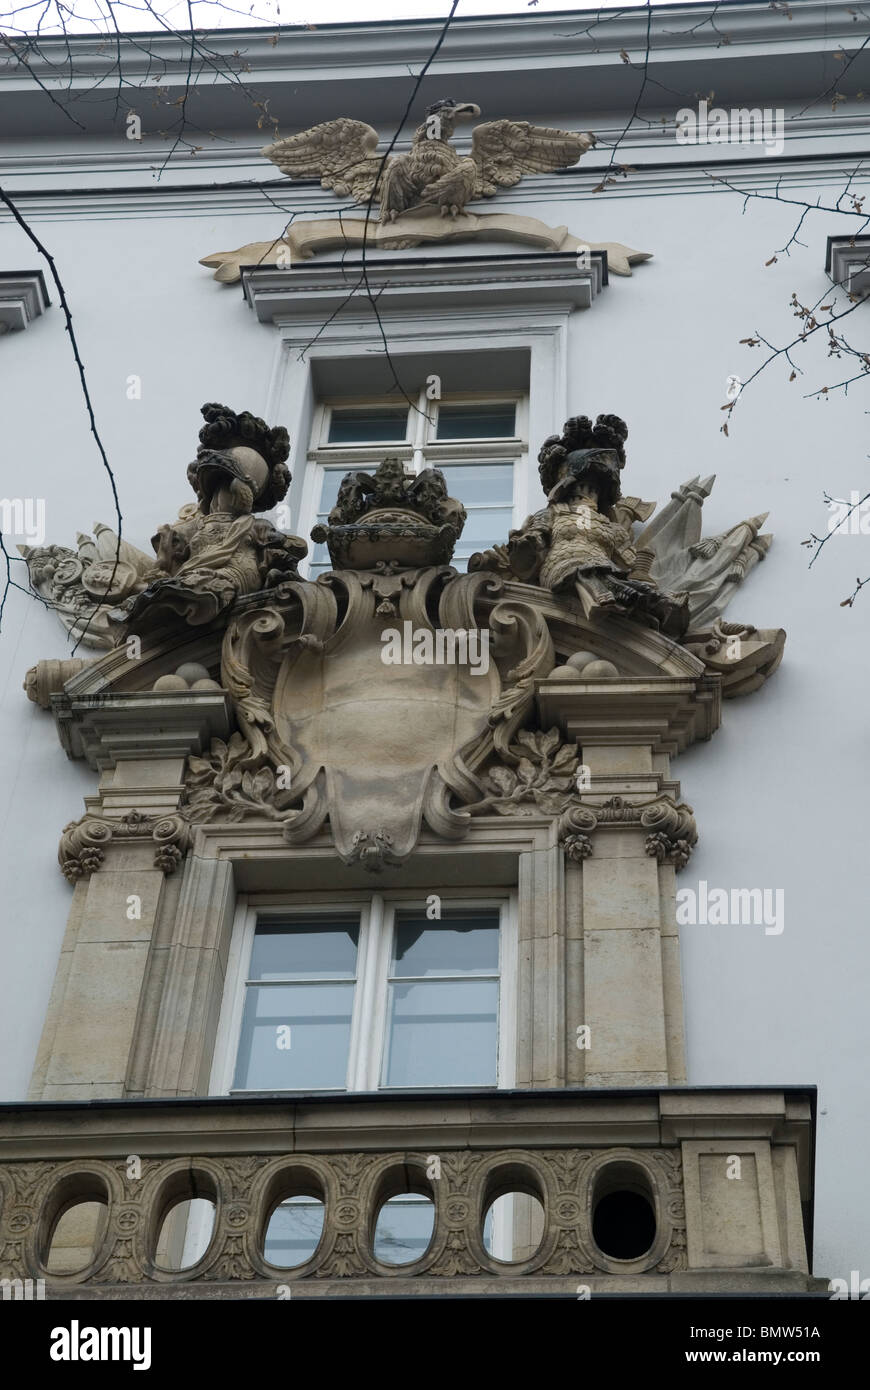 Architectural details of an Old building Berlin Germany Stock Photo